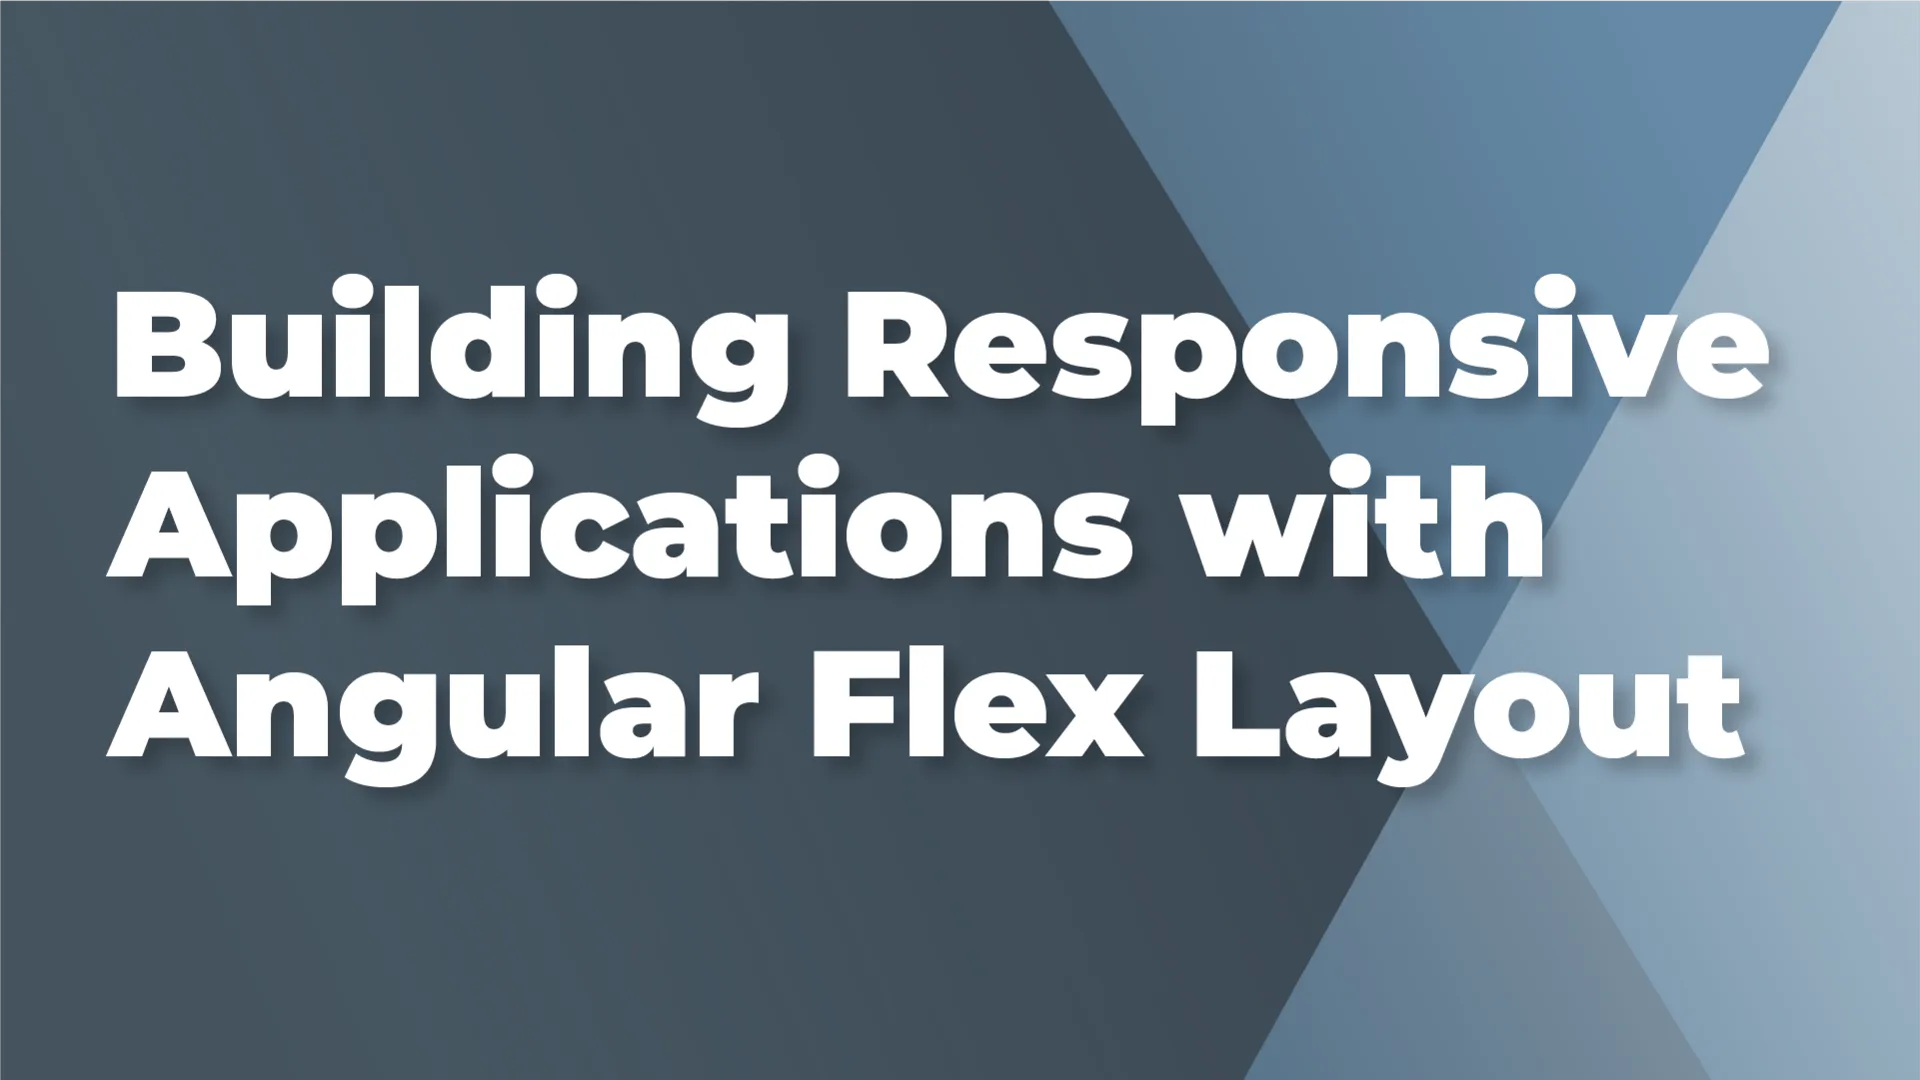 Building Responsive Applications with Angular Flex Layout